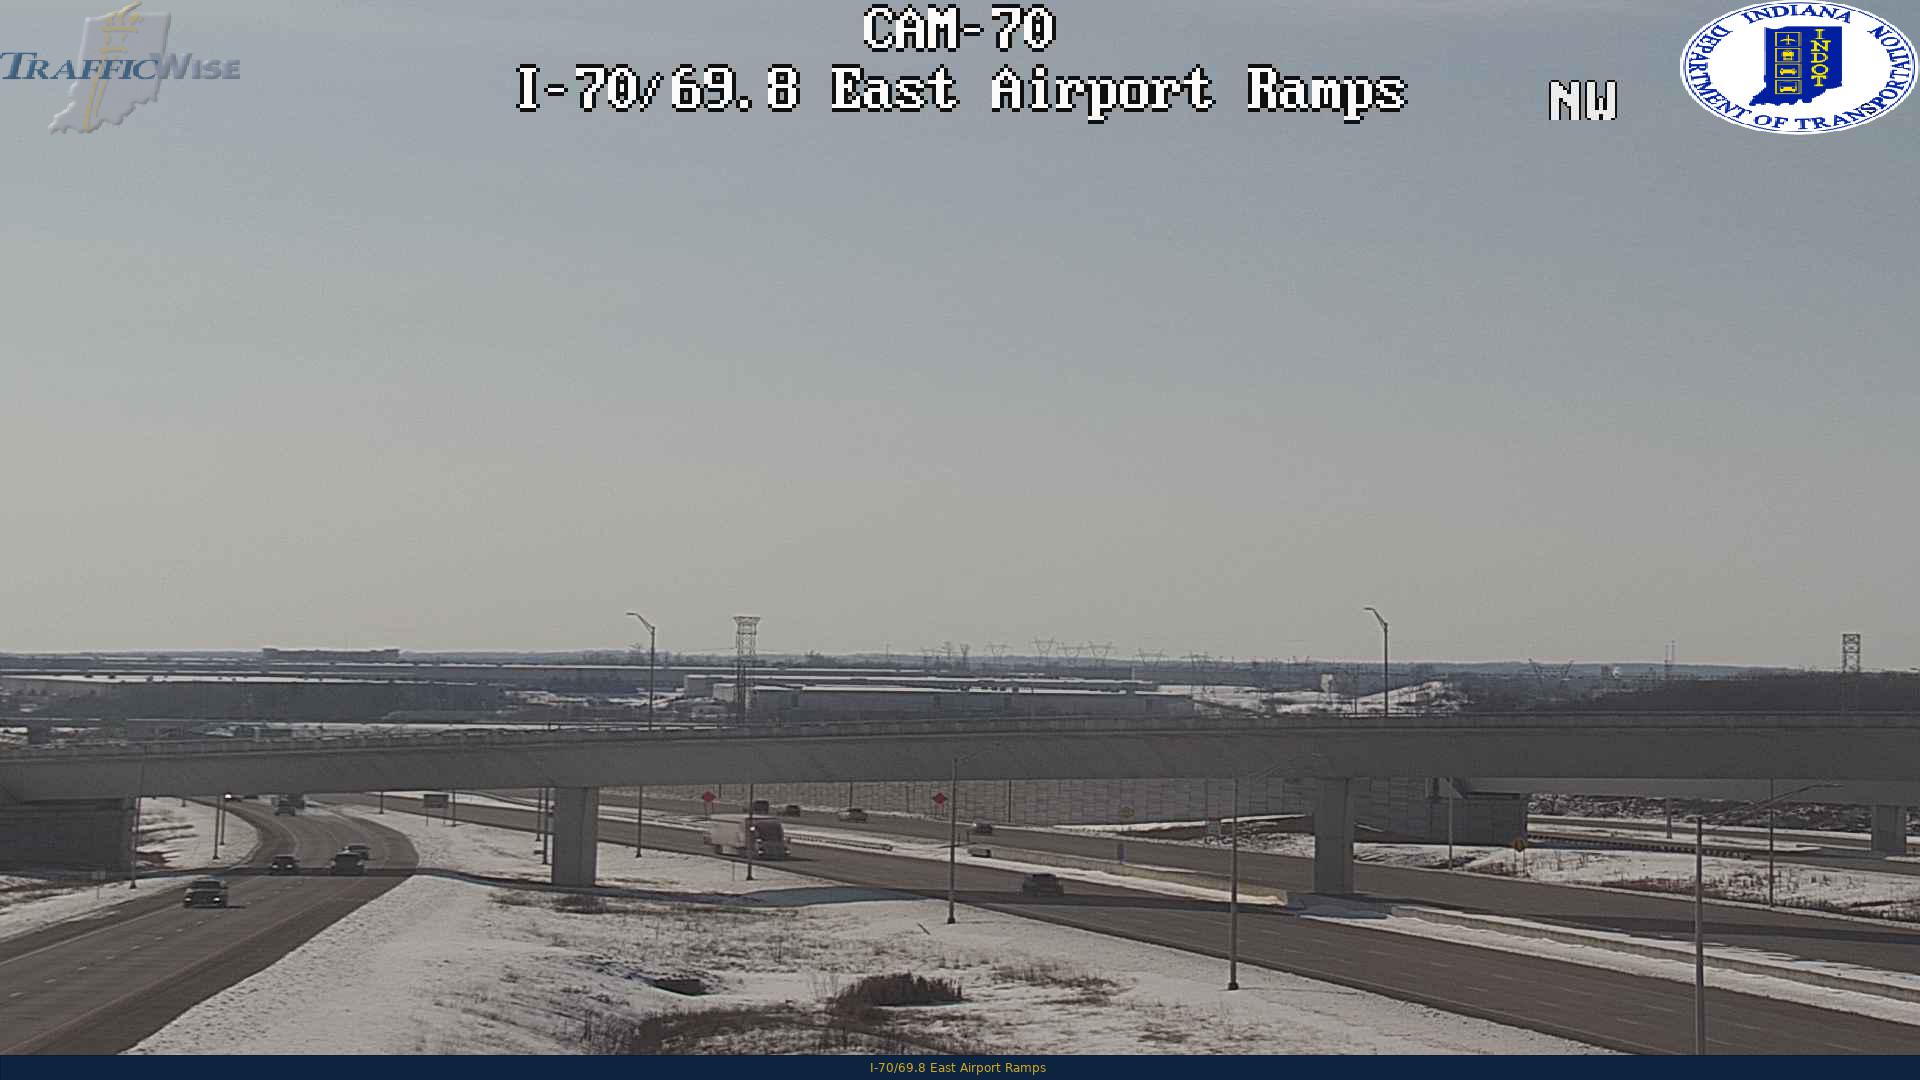 I-70/69.8 East Airport Ramps  (87) () - Indiana